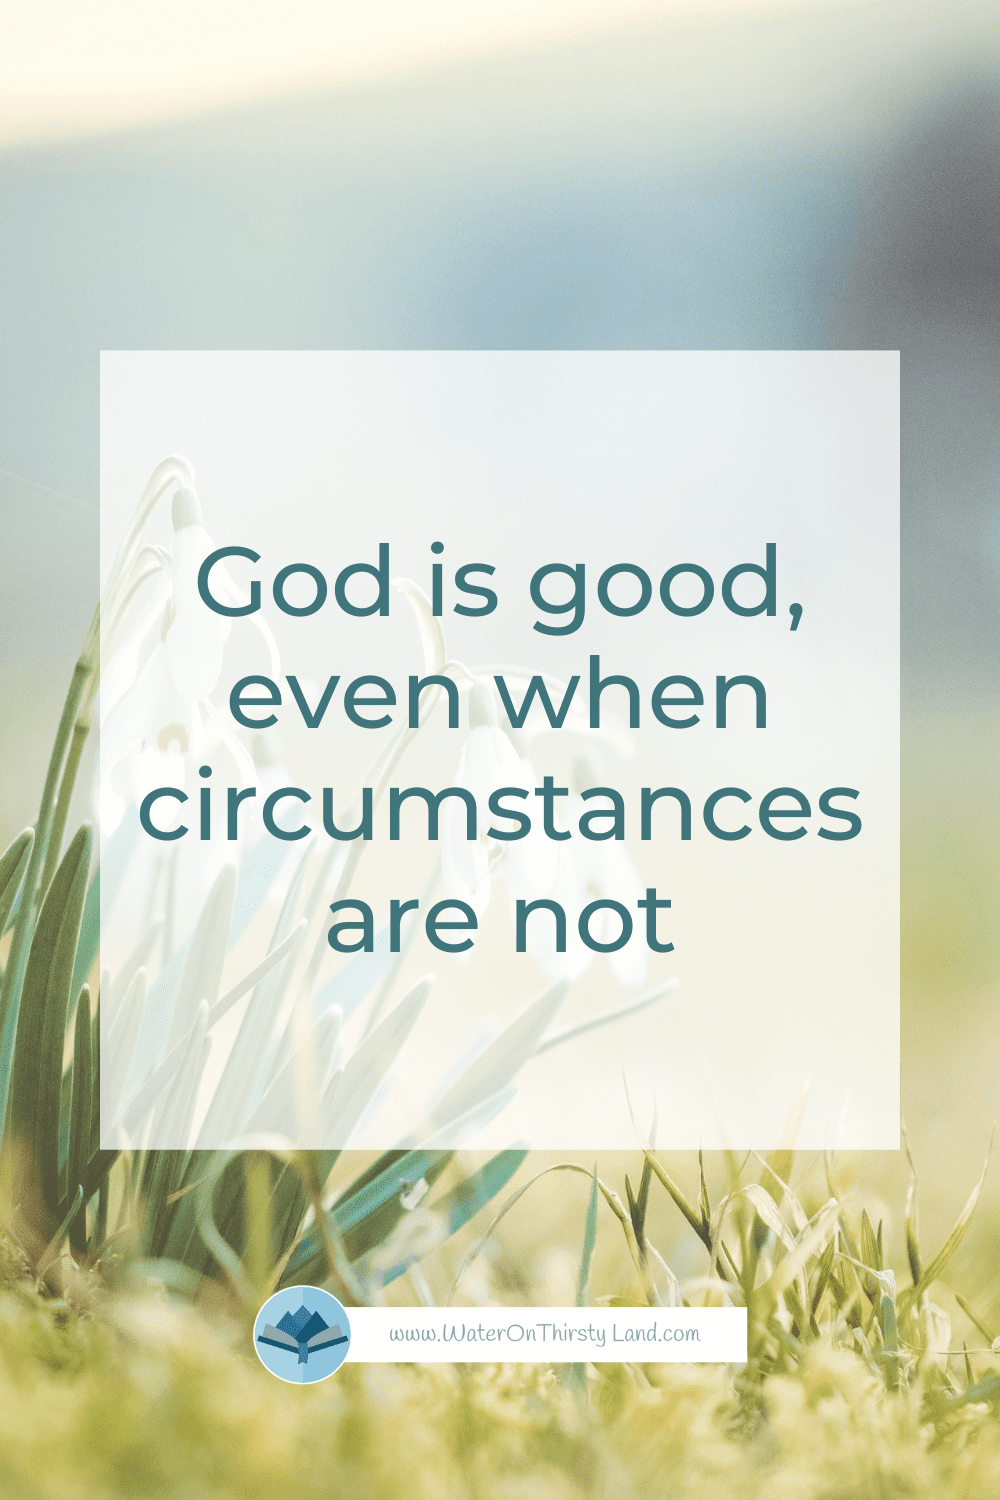 God is good, even when circumstances are not